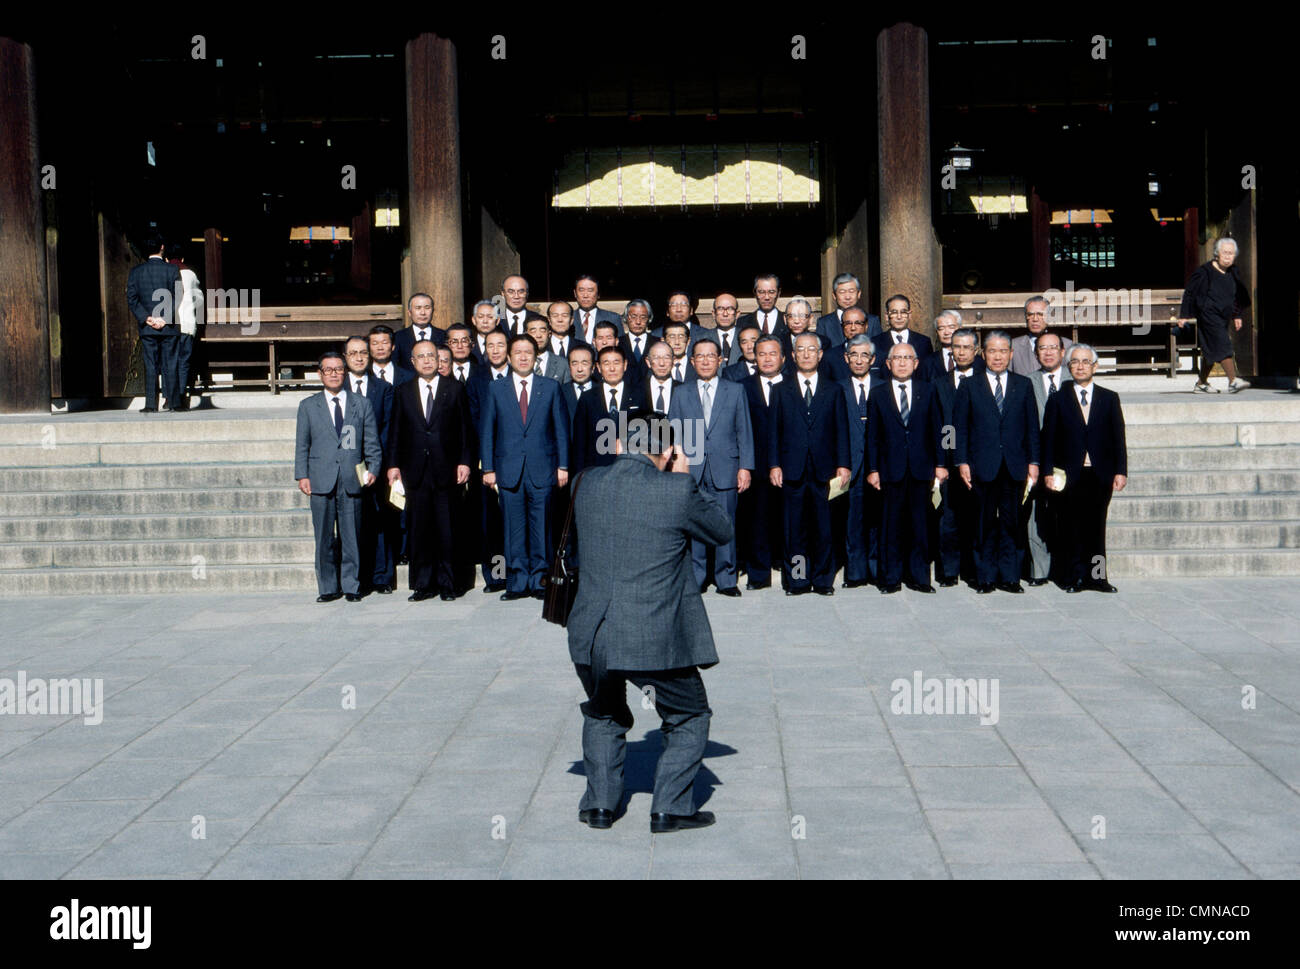 A group of serious Japanese businessmen in suits and ties pose for a formal photographic portrait on the steps of the Meiji Shrine in Tokyo, Japan. Stock Photo